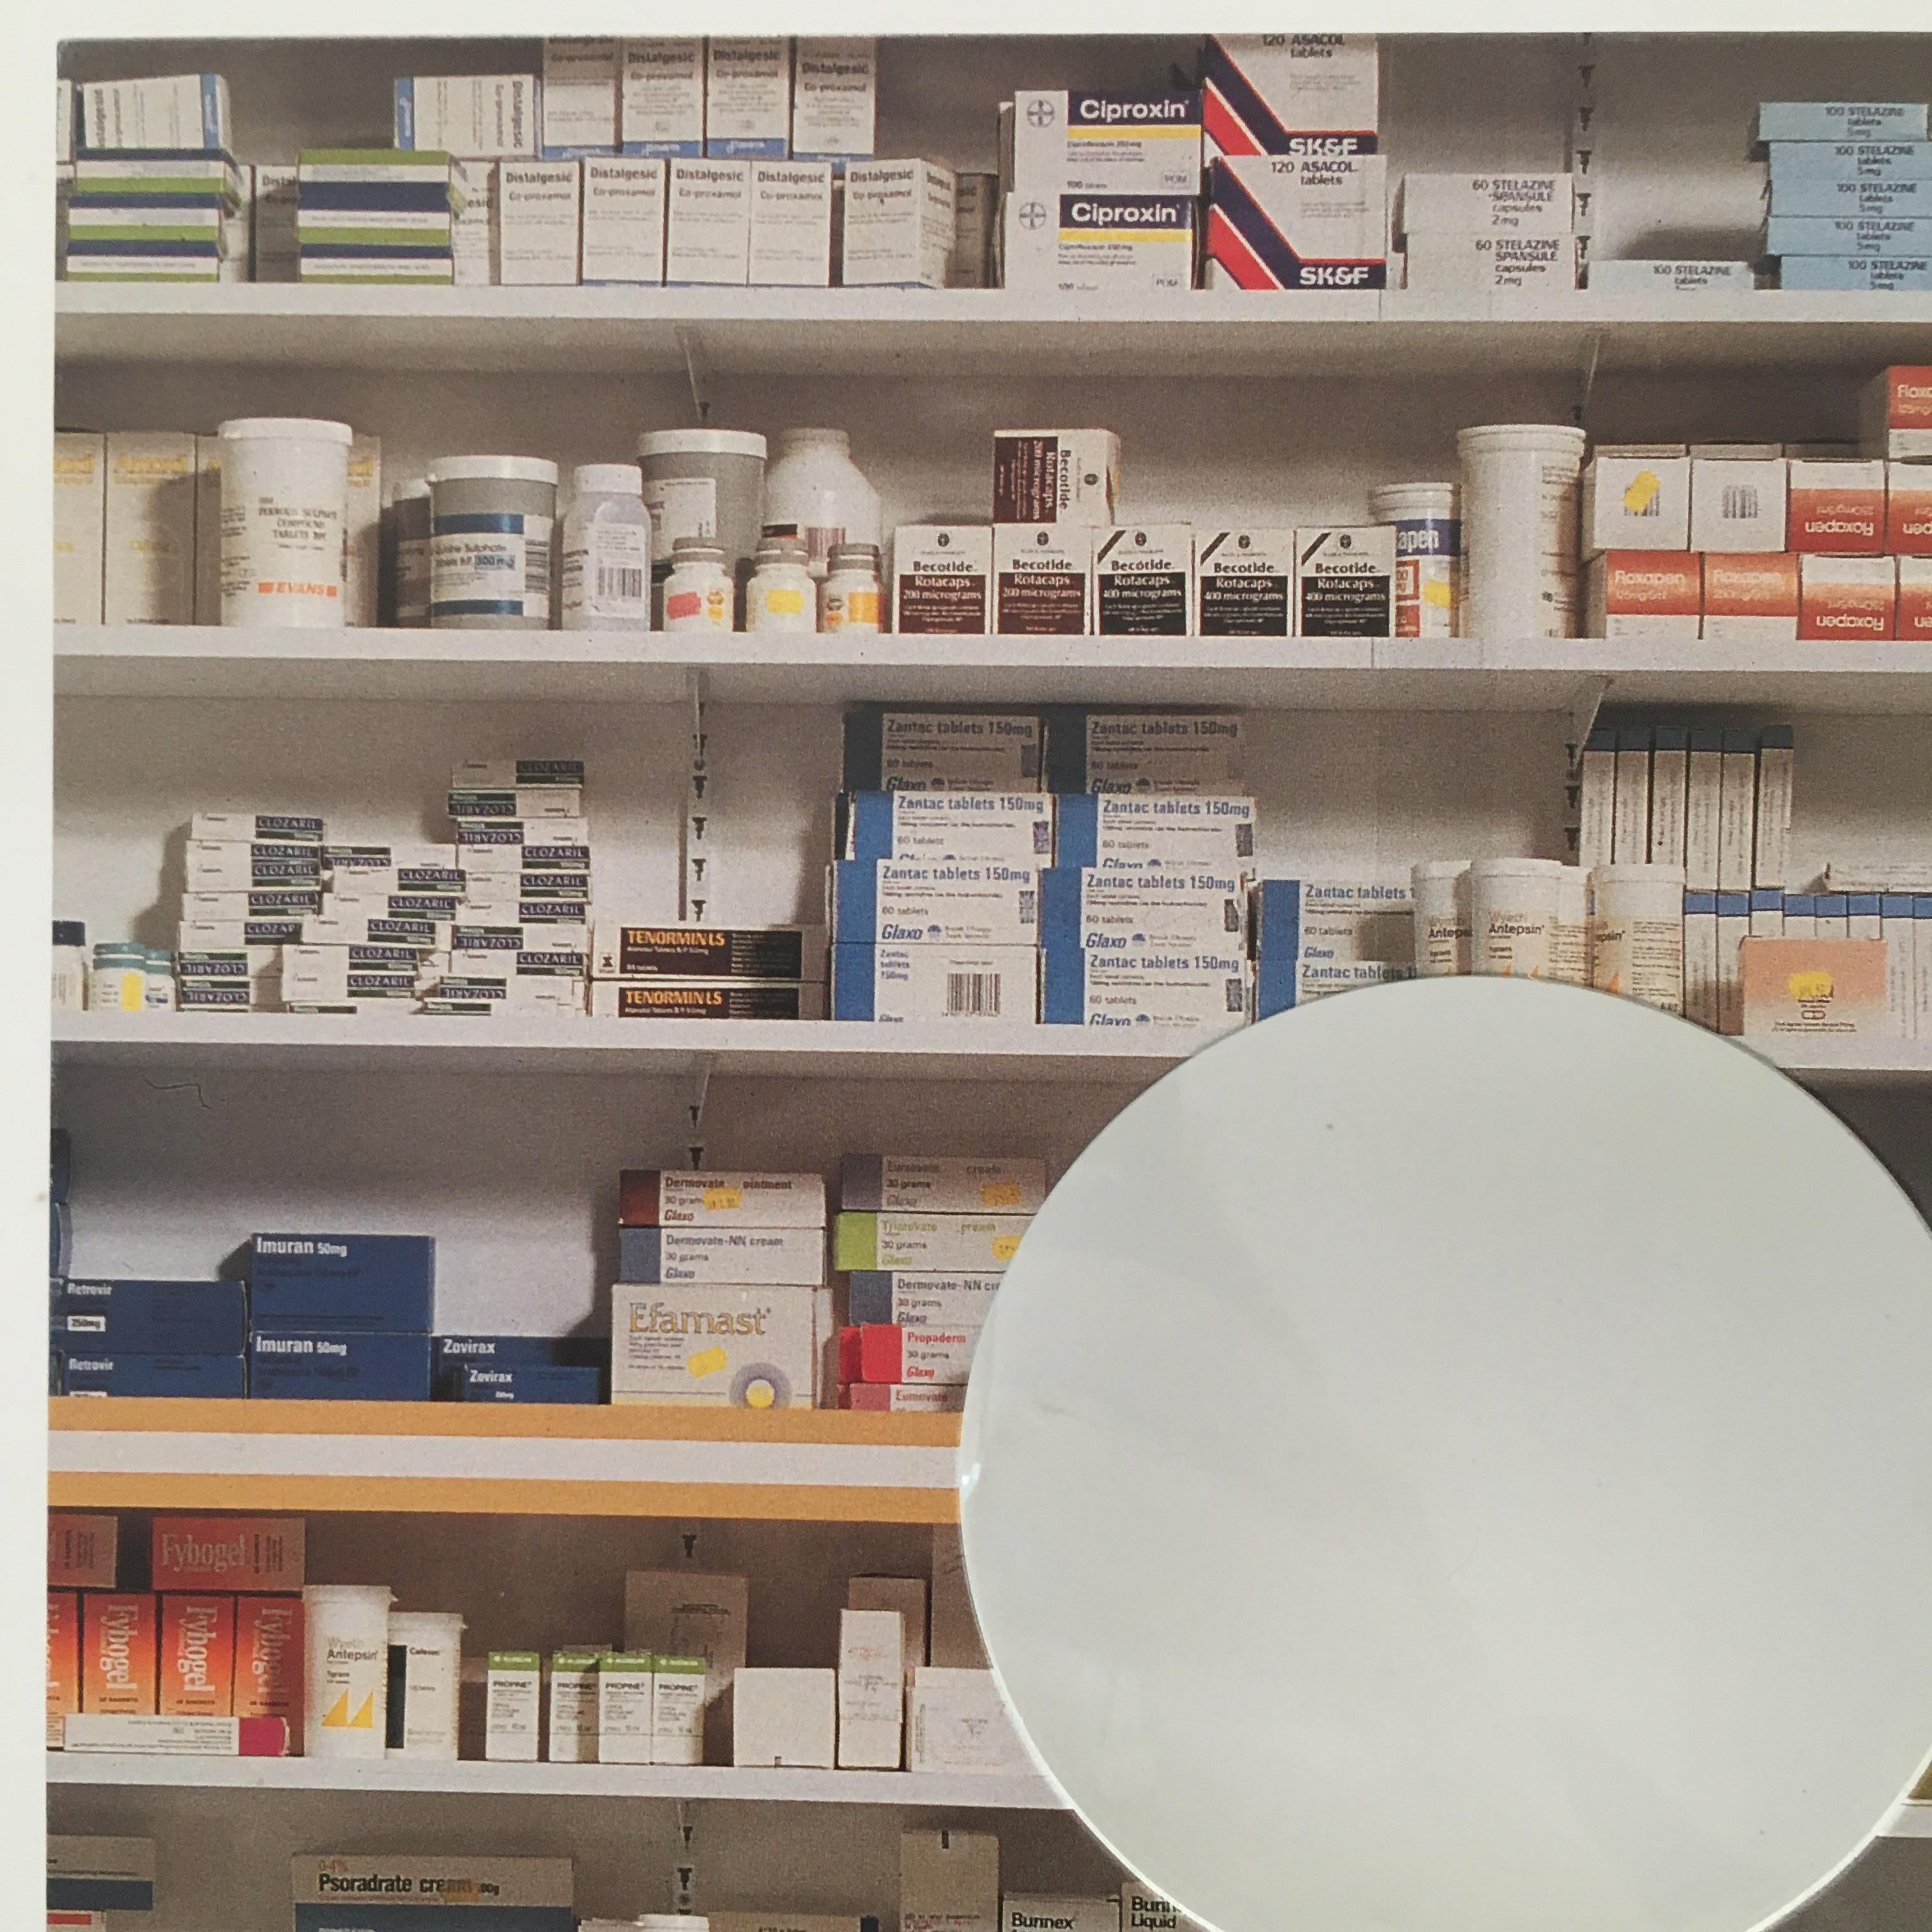 Damien Hirst (British, born 1965)
Pharmacy, 1992
Offset lithograph in colors on 4-ply board with diecut hole in center
8-1/2in H x 8-1/2in L  
Edition 92/200
Signed, numbered and with inscription 'it's a drug store!' in ink along lower edge
Framed